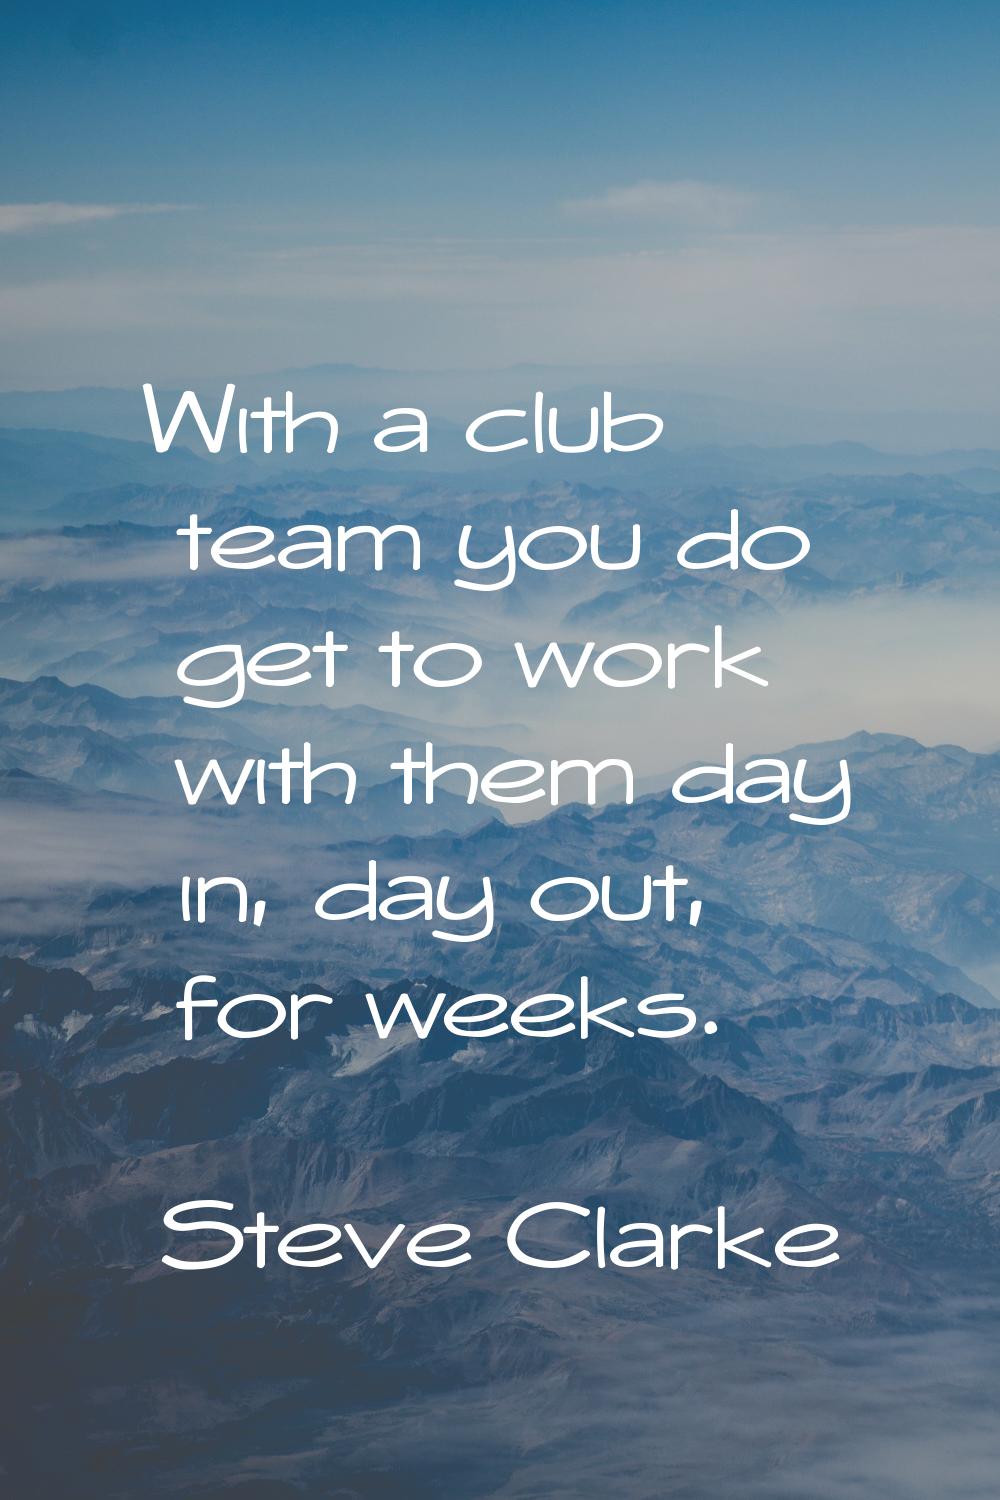 With a club team you do get to work with them day in, day out, for weeks.